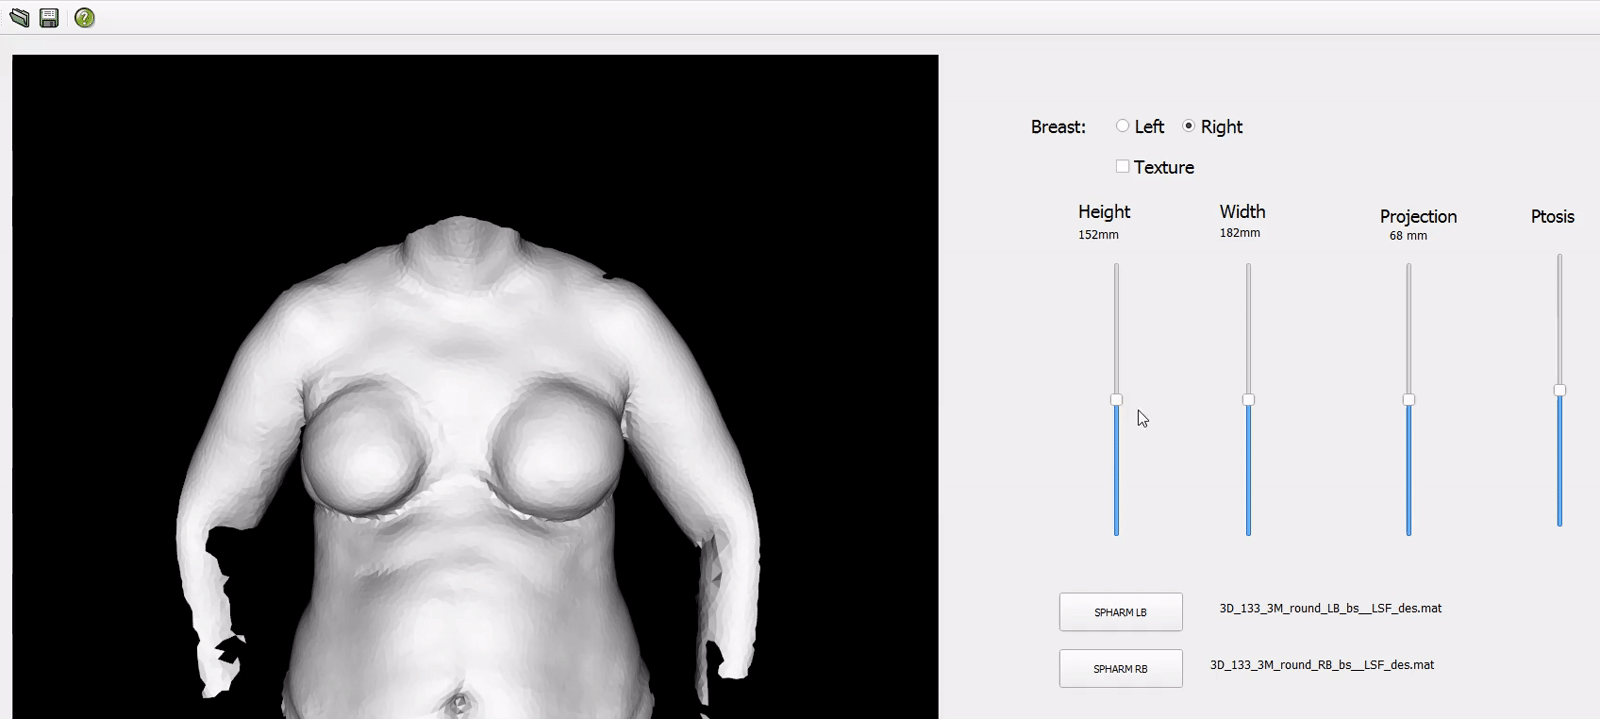 Breast shape modelling and simulation